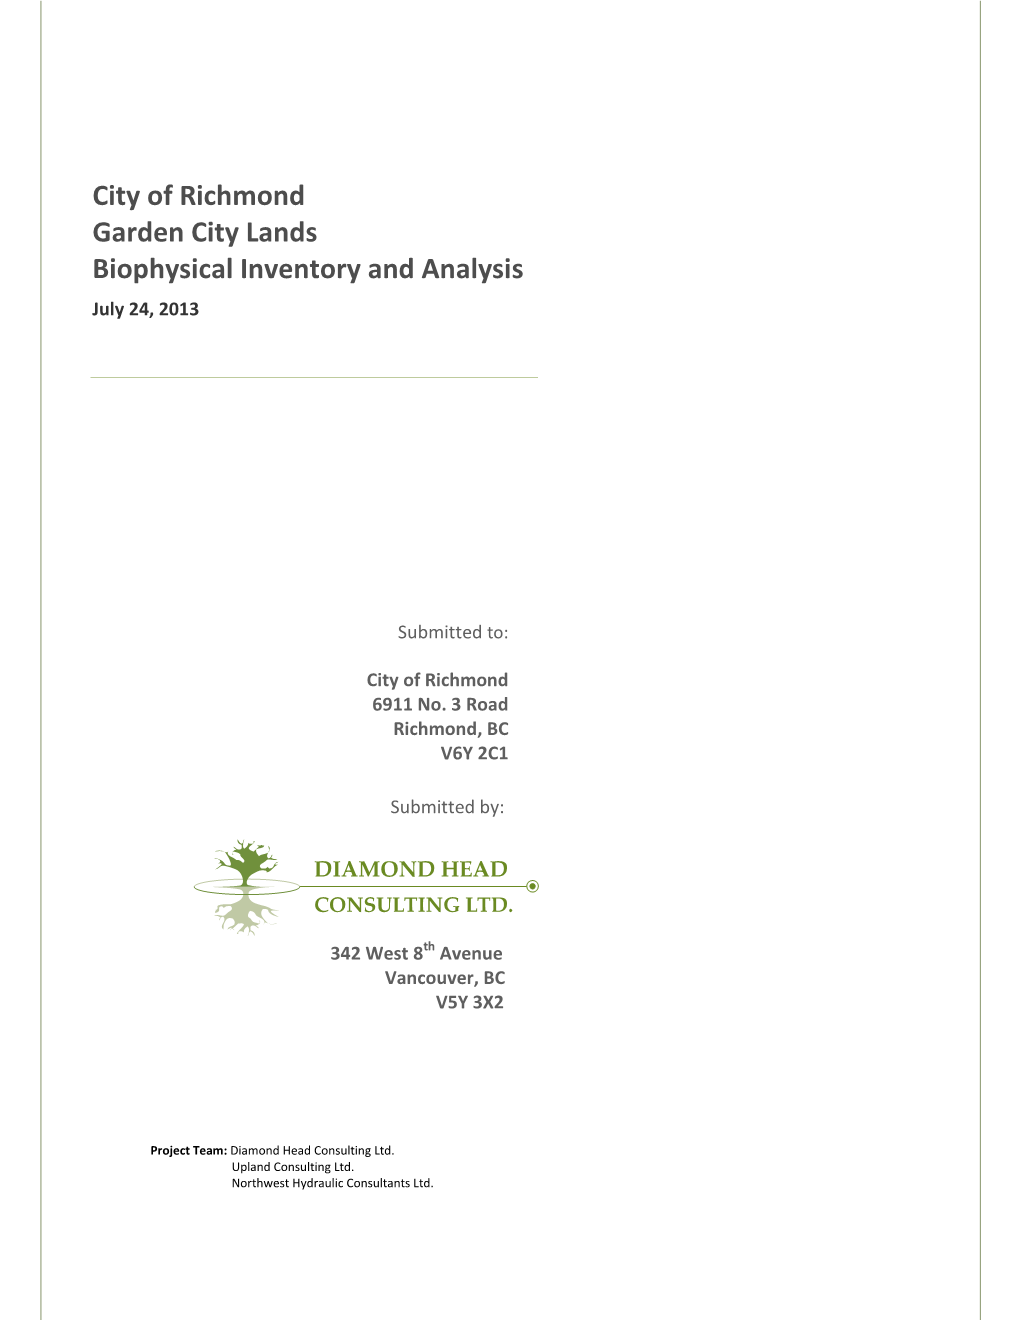 City of Richmond Garden City Lands Biophysical Inventory and Analysis